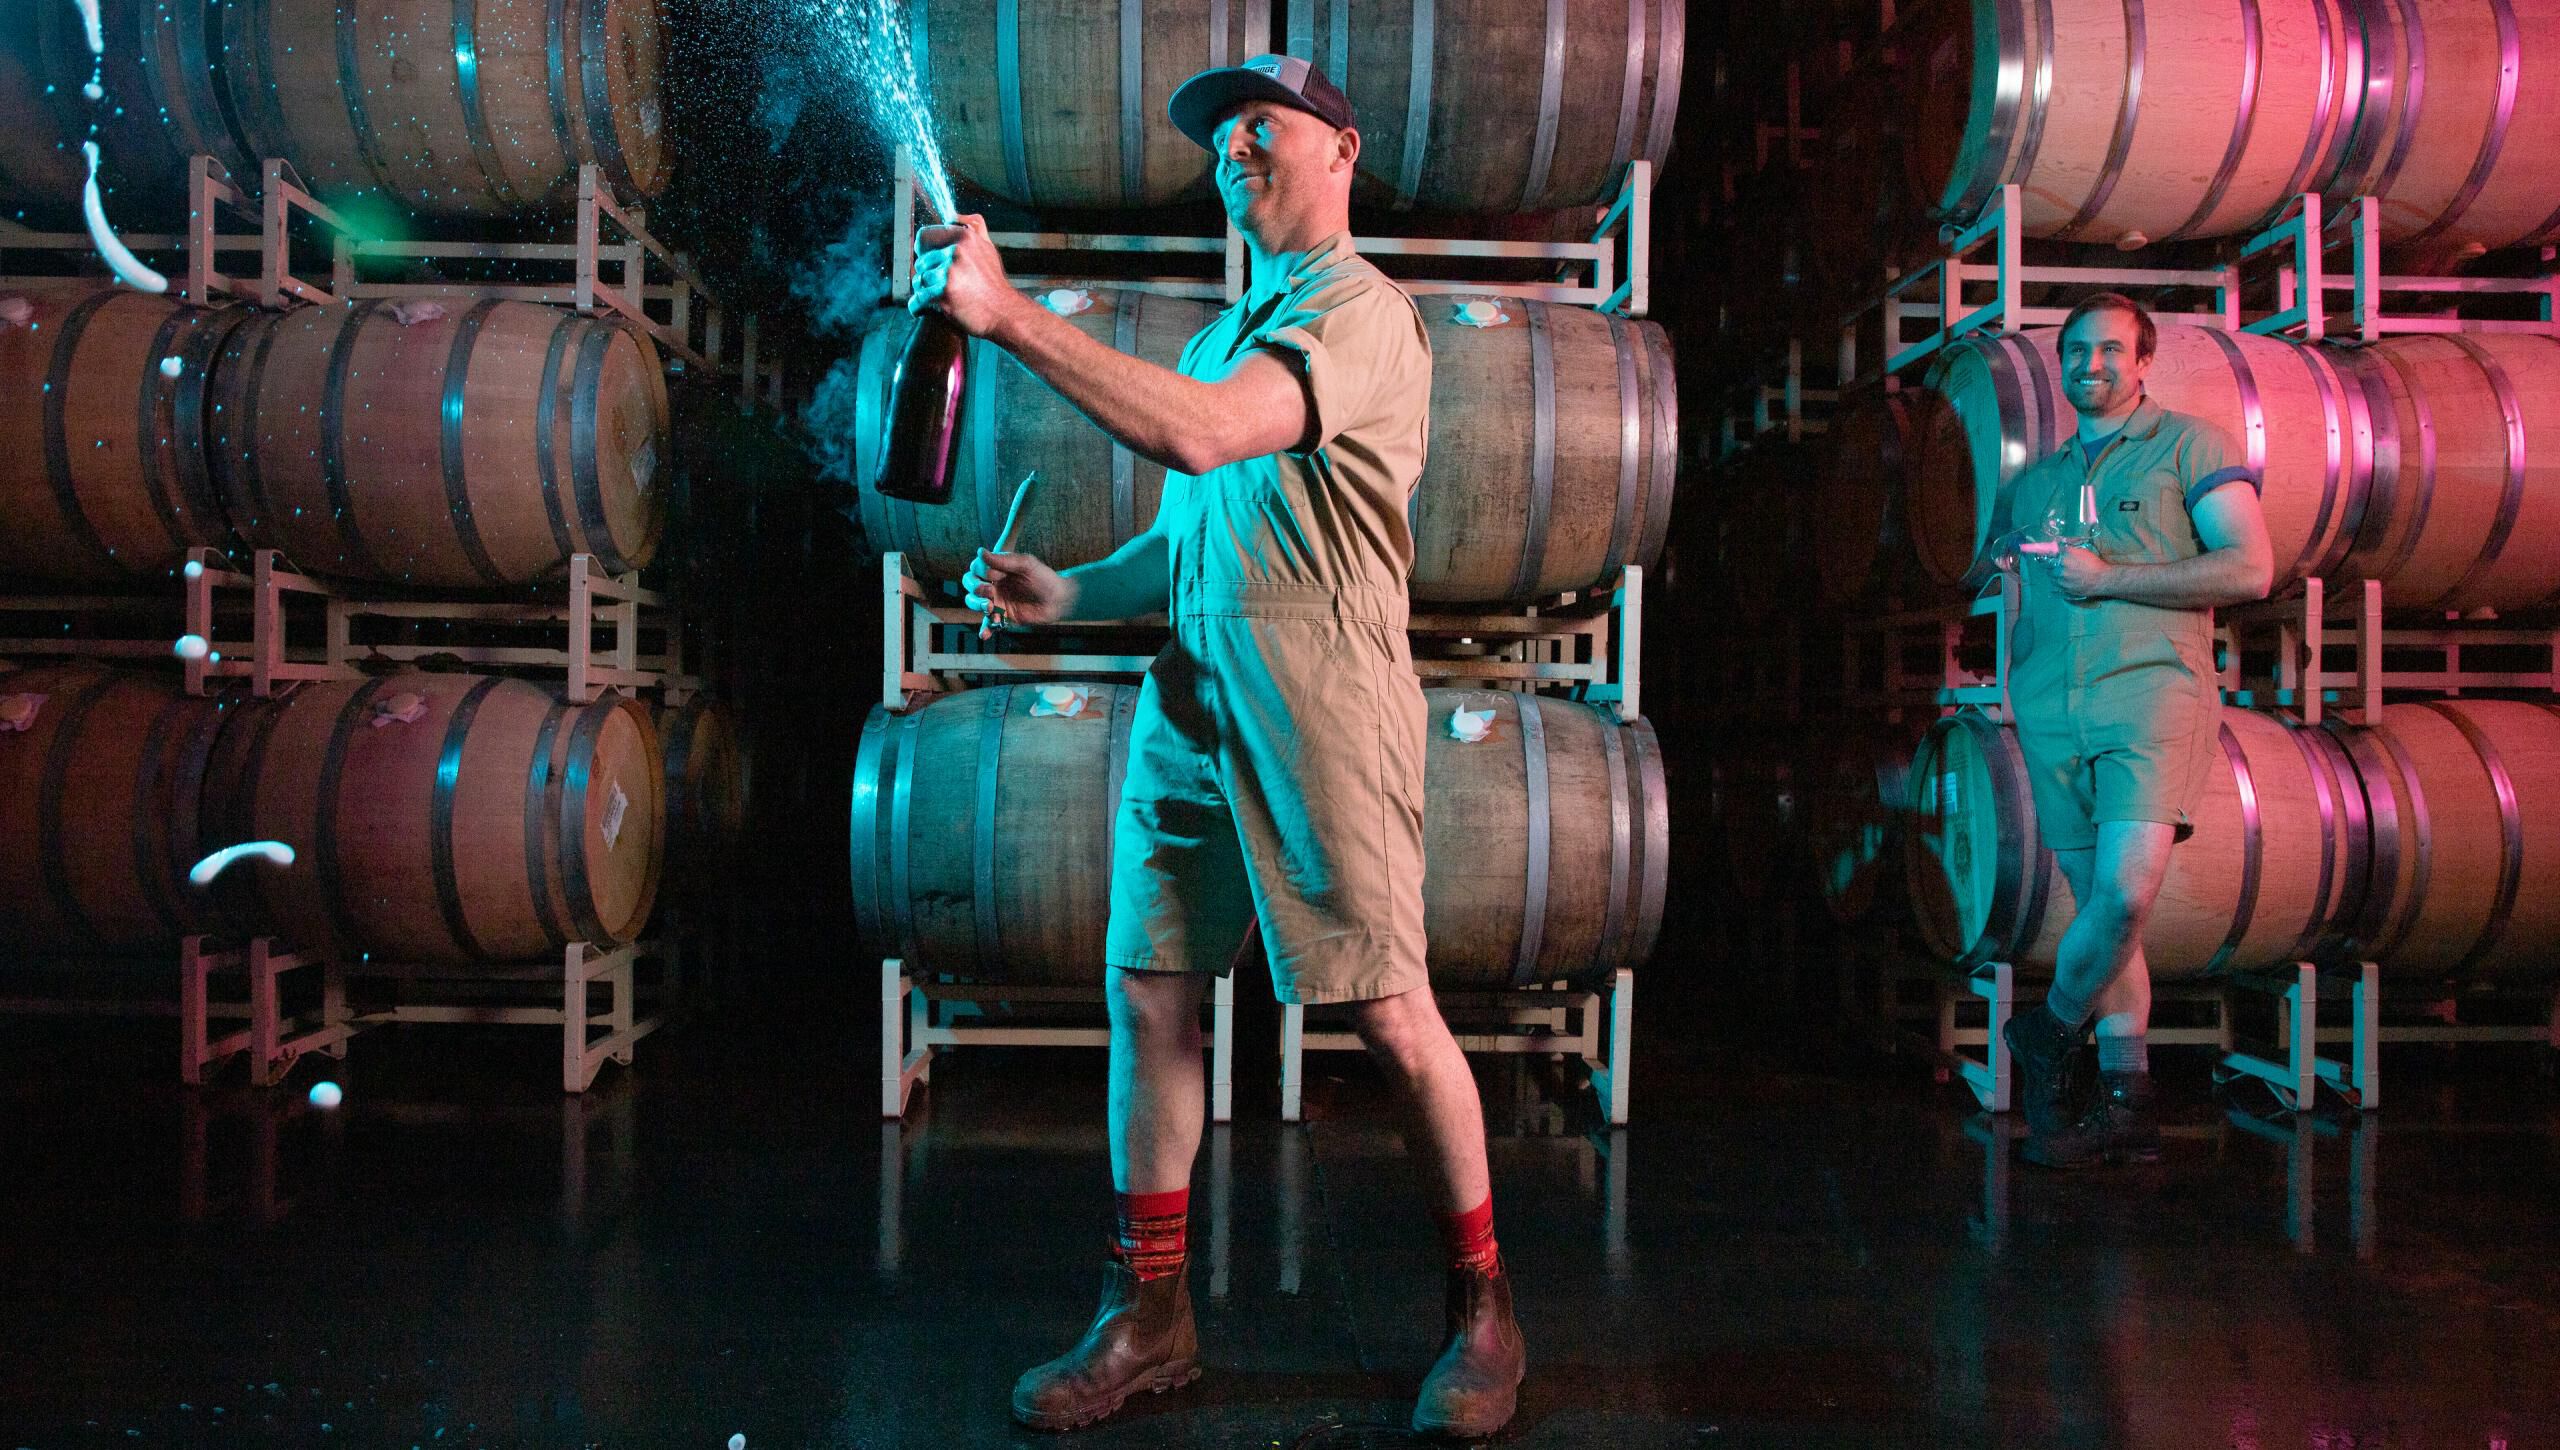 Man holding and opening a bottle of sparking wine spraying wine in the cellar